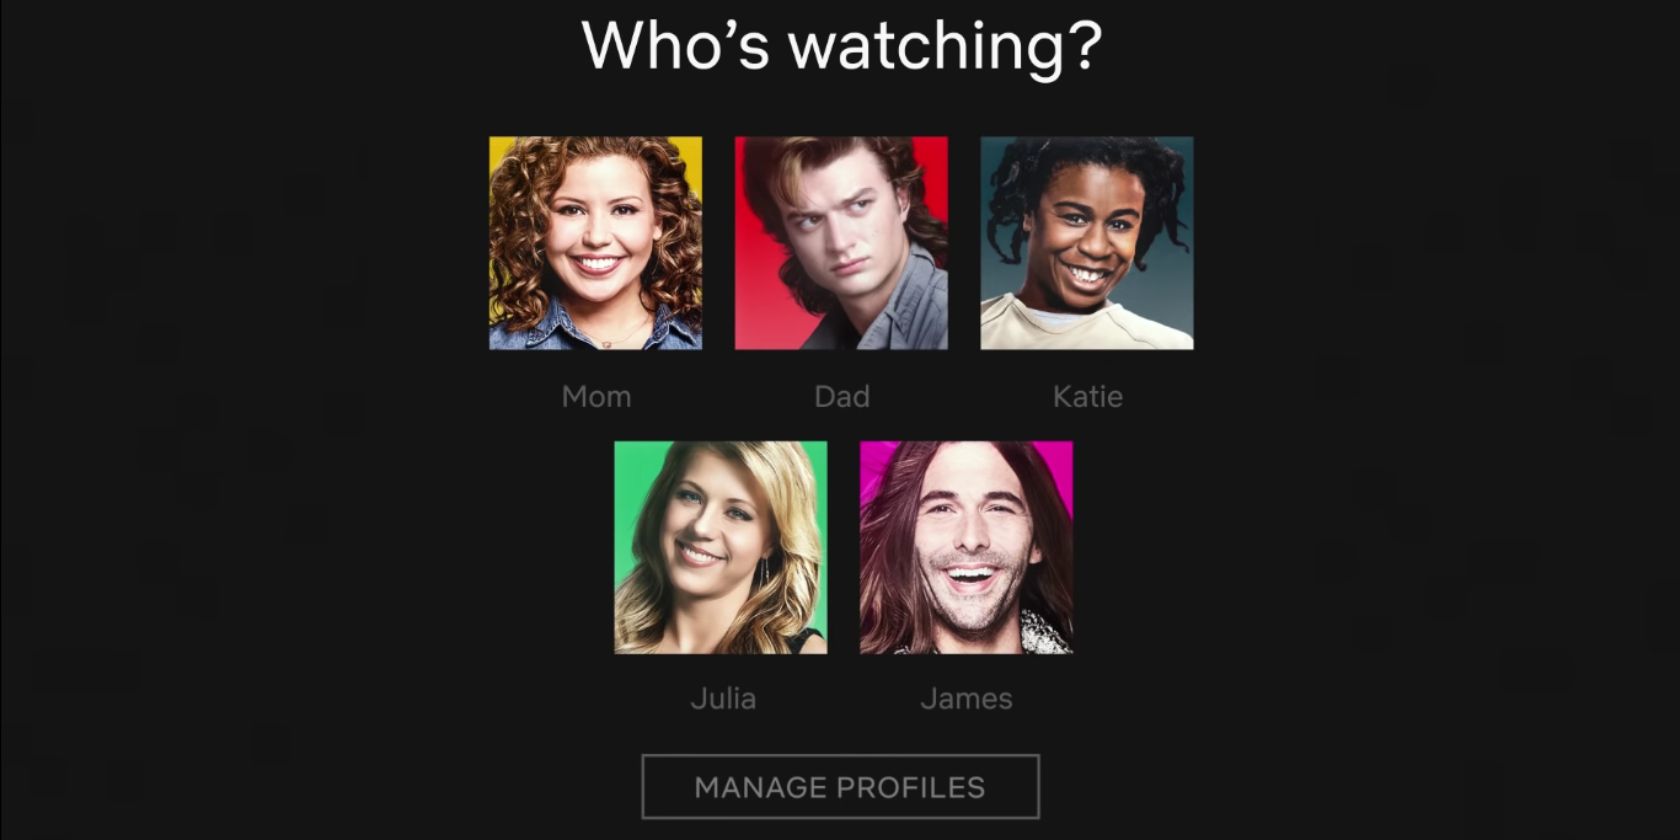 Five Netflix profiles with names and profile photos